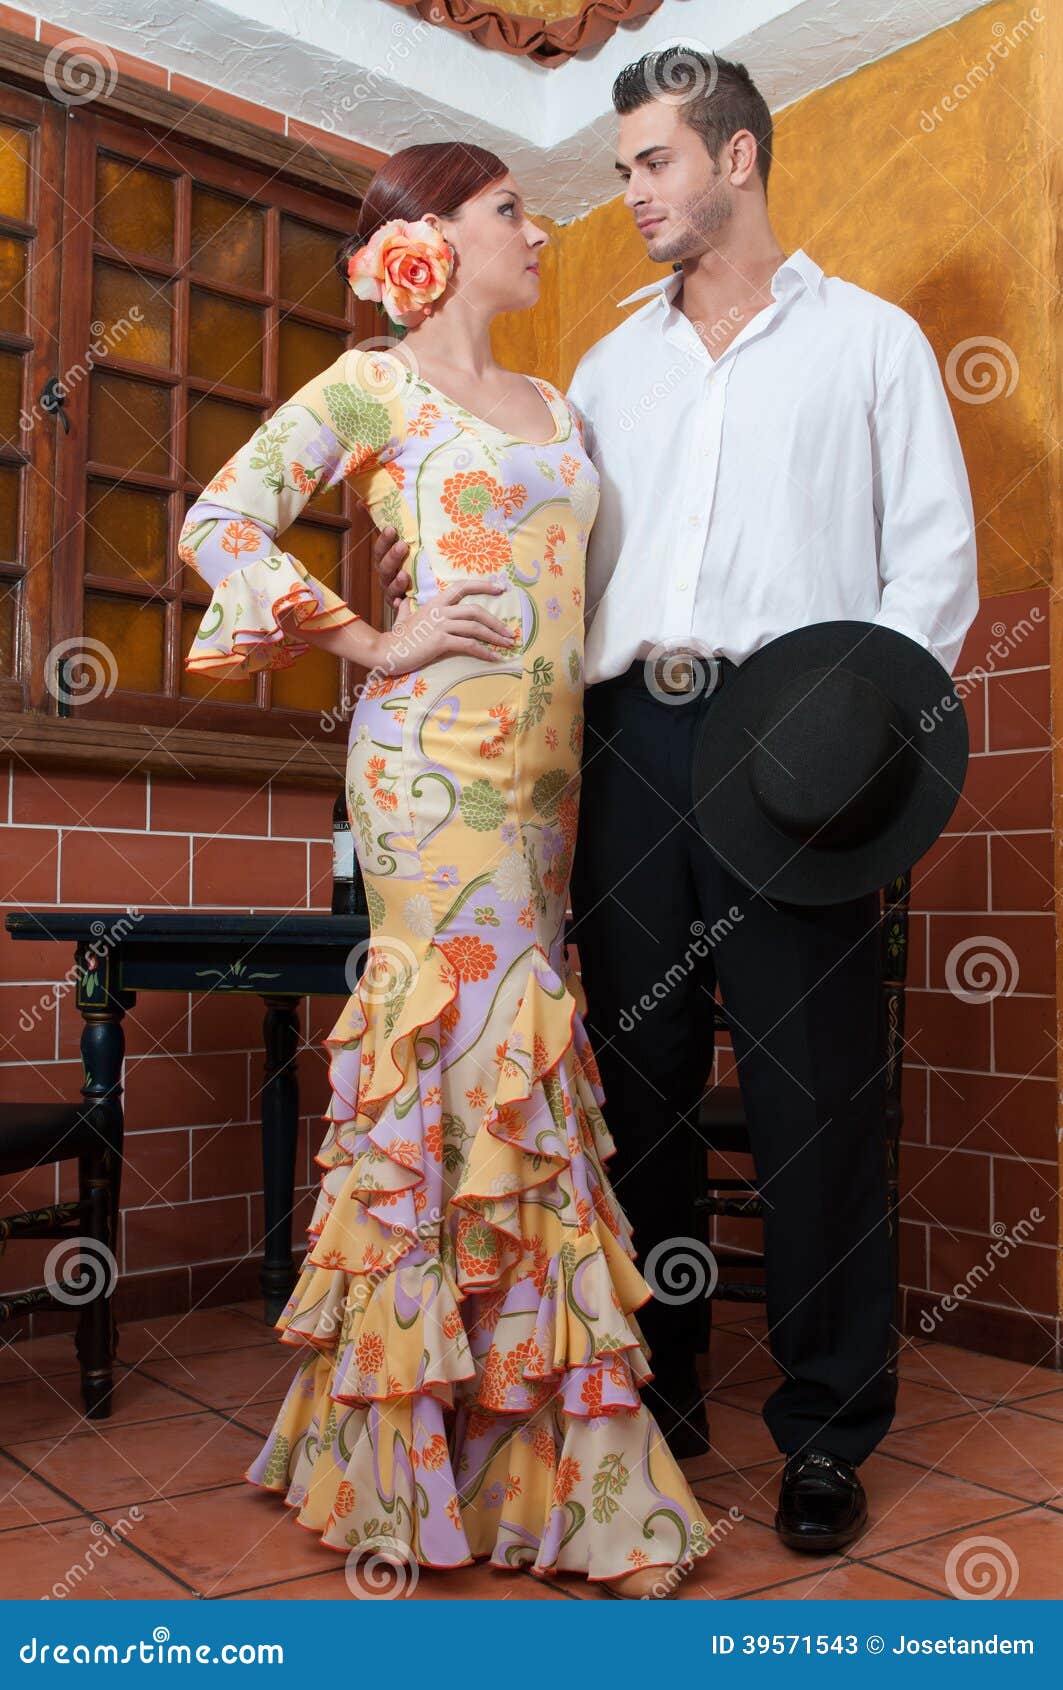 woman and man during the feria de abril on april spain